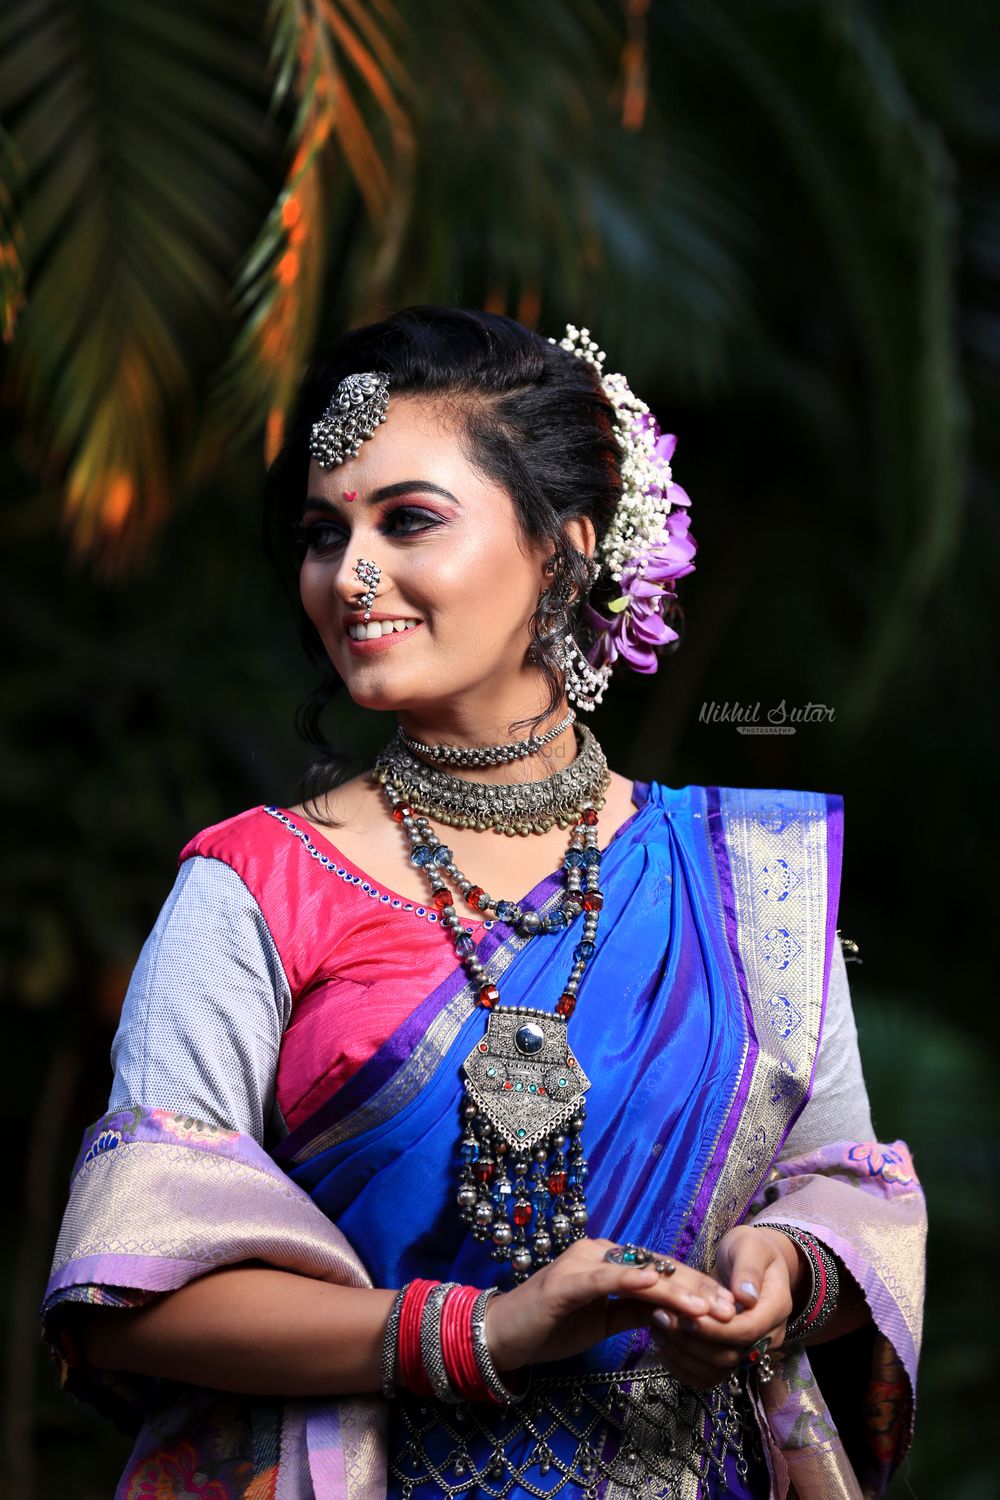 Photo From BRIDE Concept shoot - By Nikhil Sutar Photography